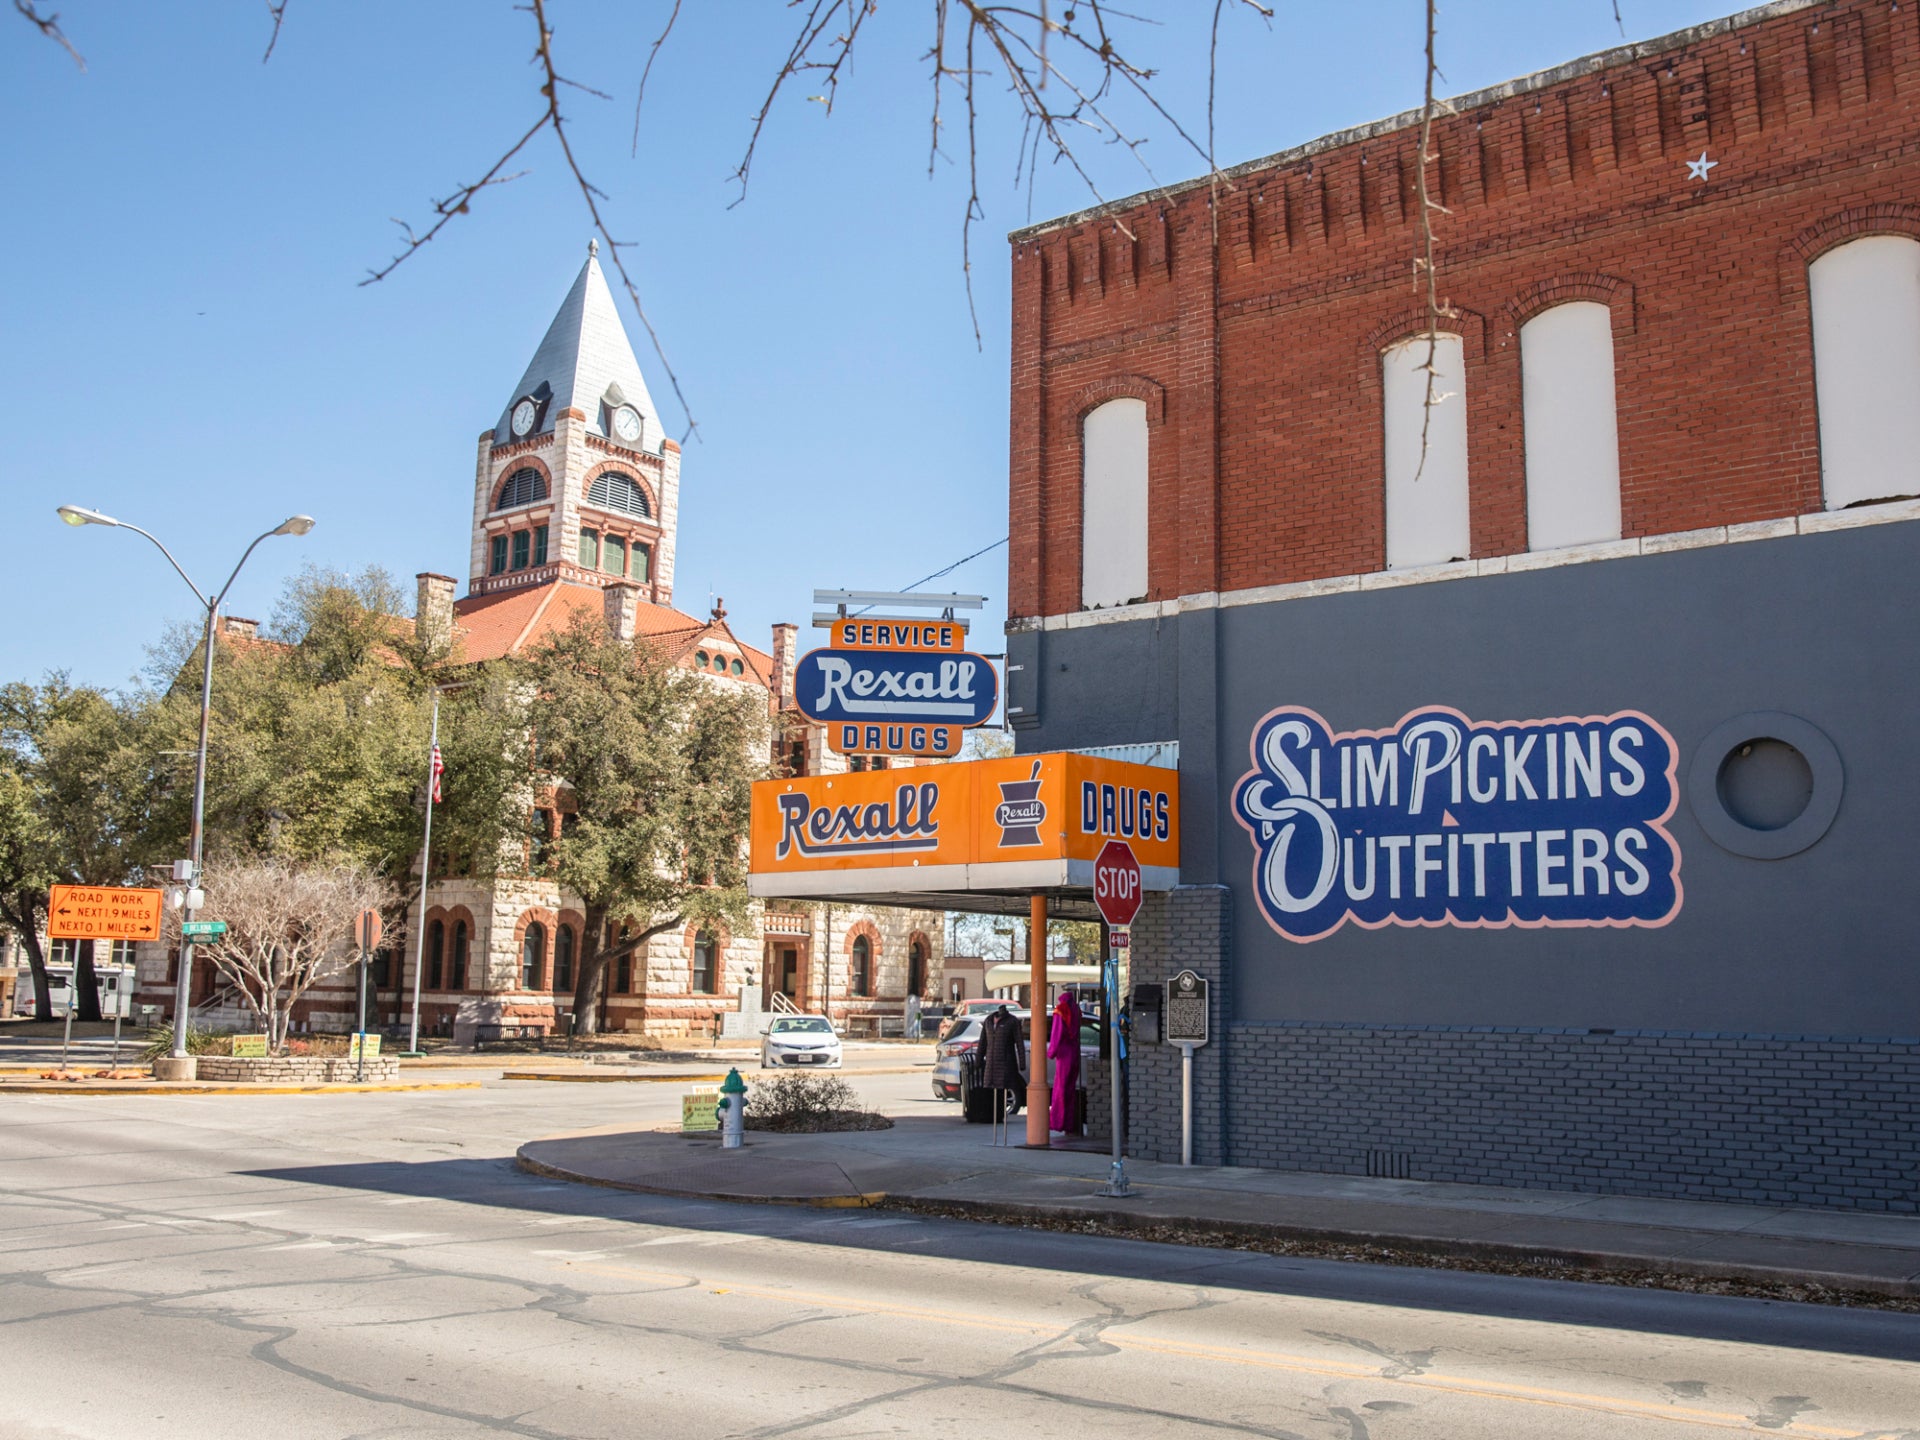 Slim Pickins Outfitters resides in downtown Stephenville, Texas, just a few yards from the county courthouse and its Confederate monument.